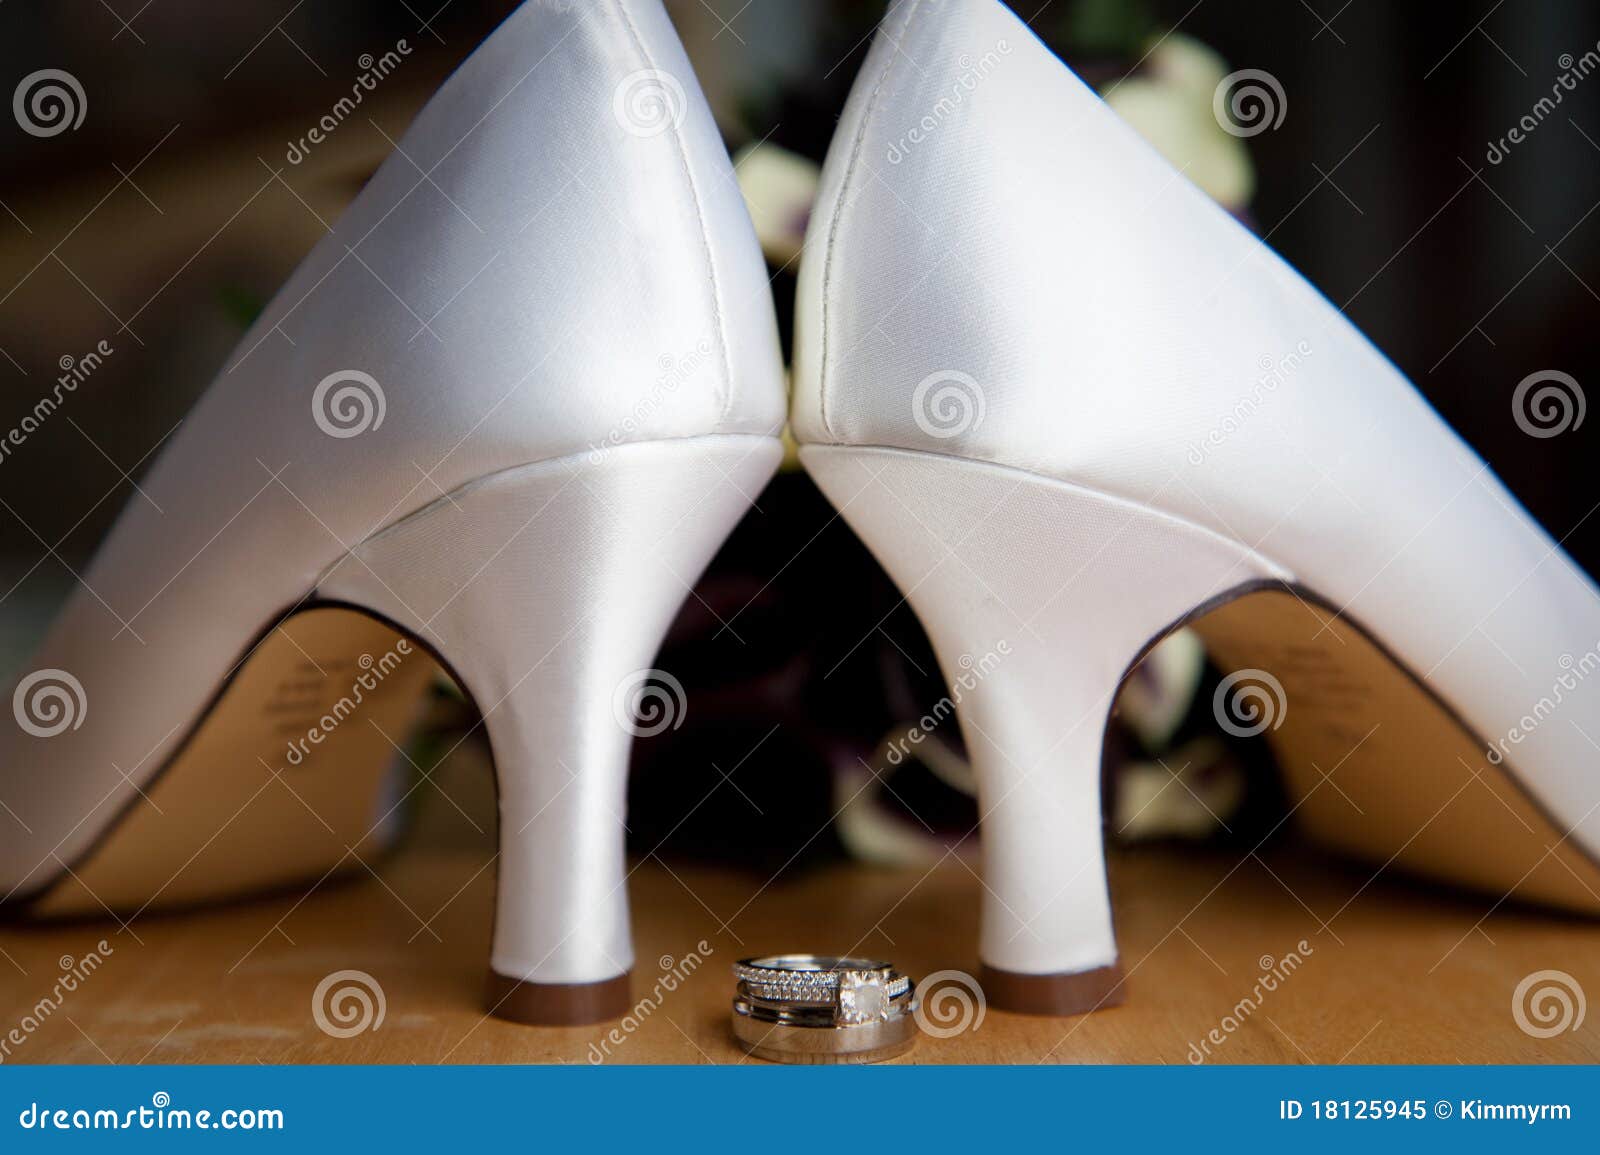 Bride S High Heel Shoes and Rings Stock Image - Image of beauty, detail ...